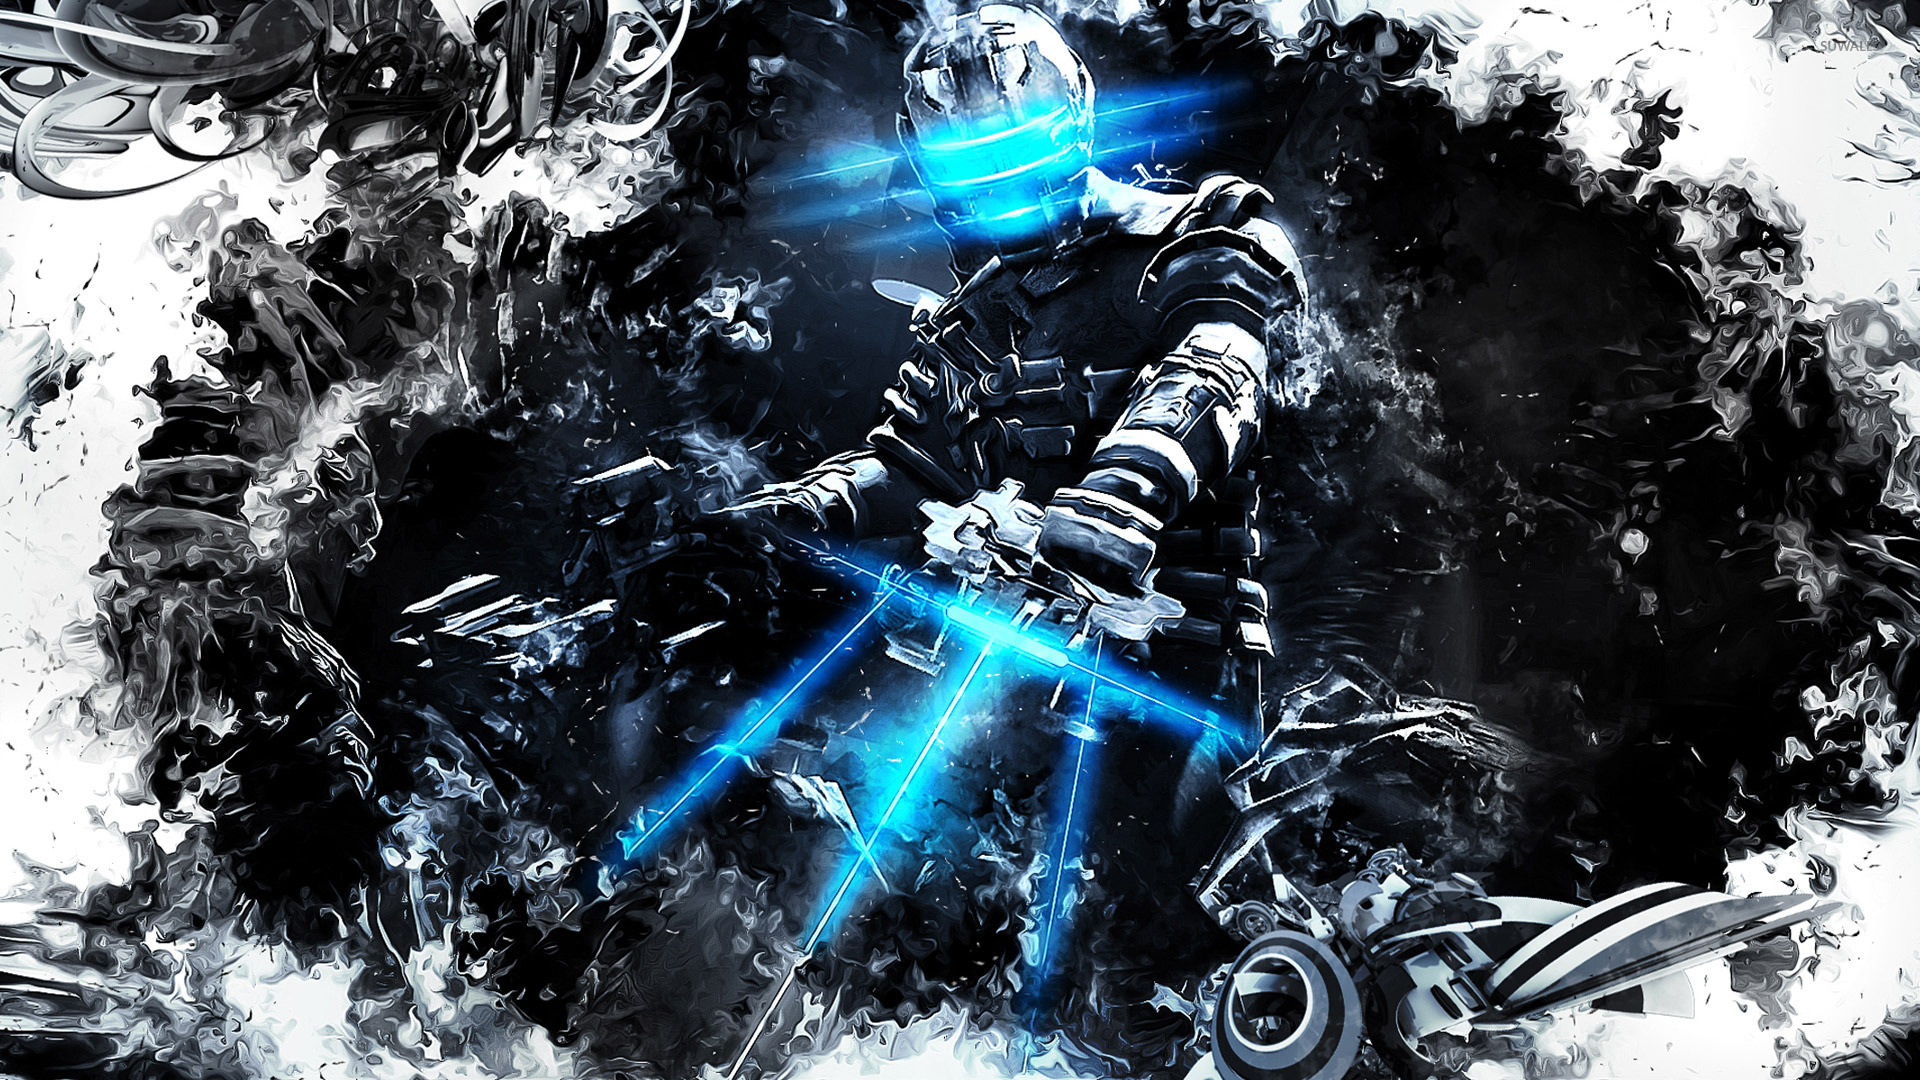 Dead Space 3 wallpaper   Game wallpapers   26840